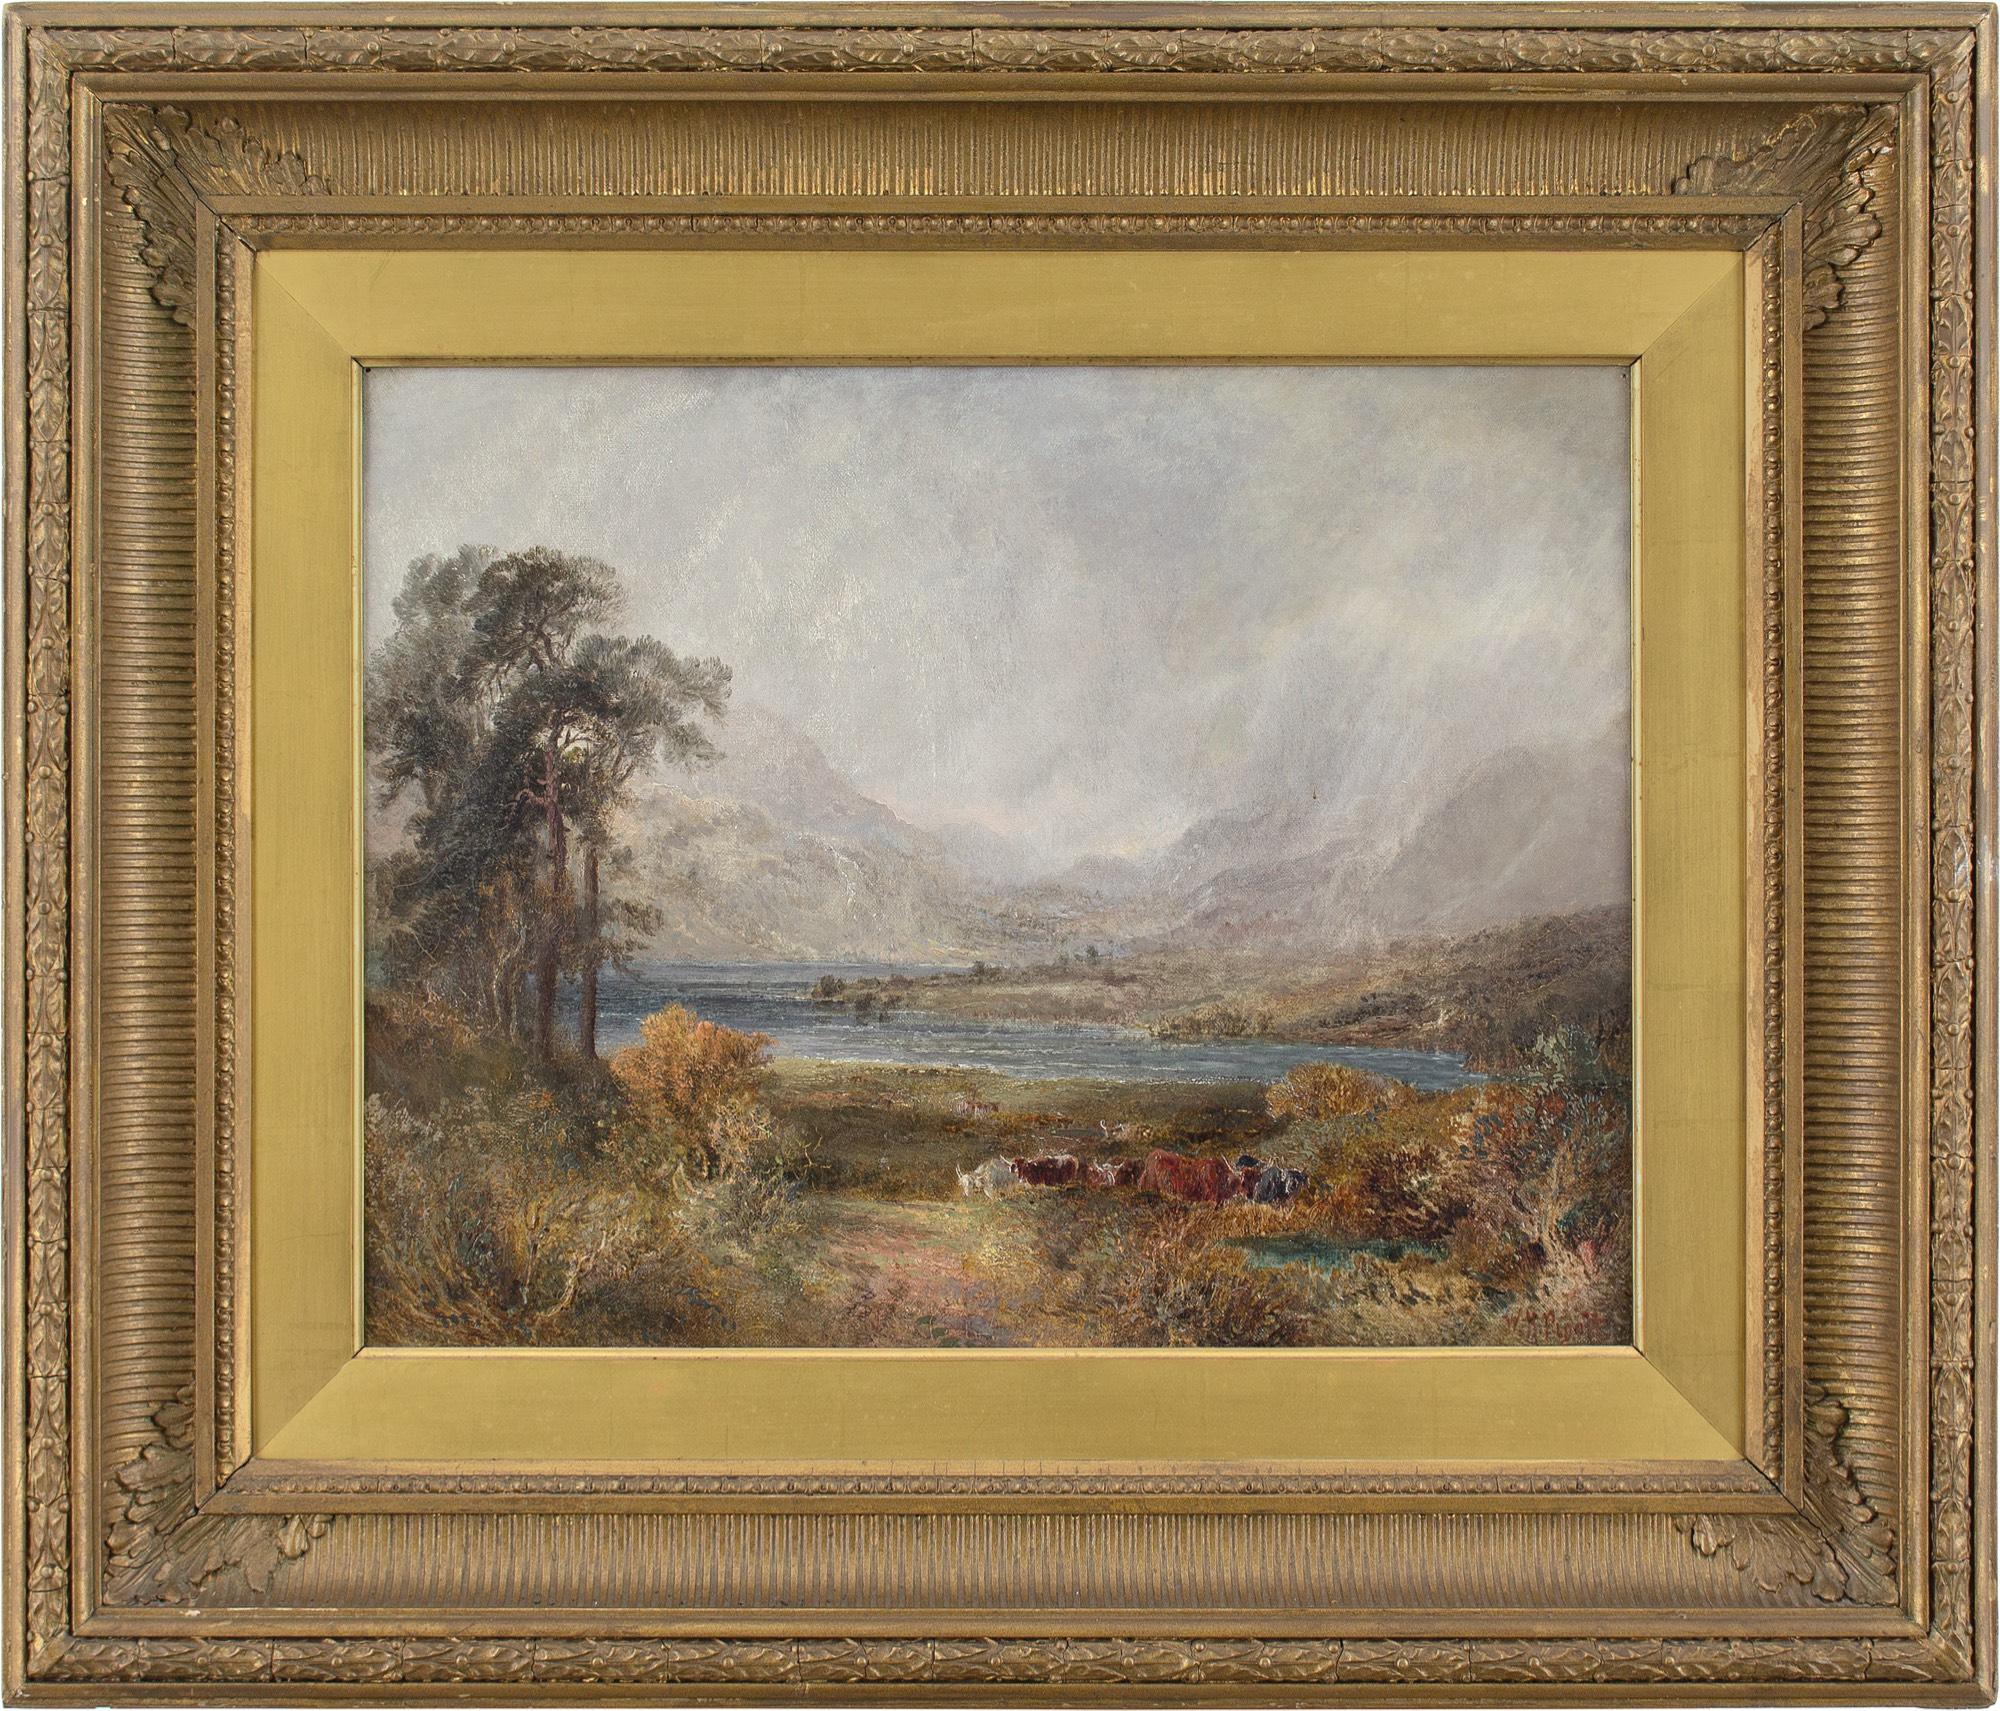 This mid-19th-century oil painting by British artist William Henry Pigott (1835-1901) depicts a Scottish loch with highland cattle.

A lake, enlivened with ripples of reflected light, bends around rugged scenery. Its light blue punctuated by darker